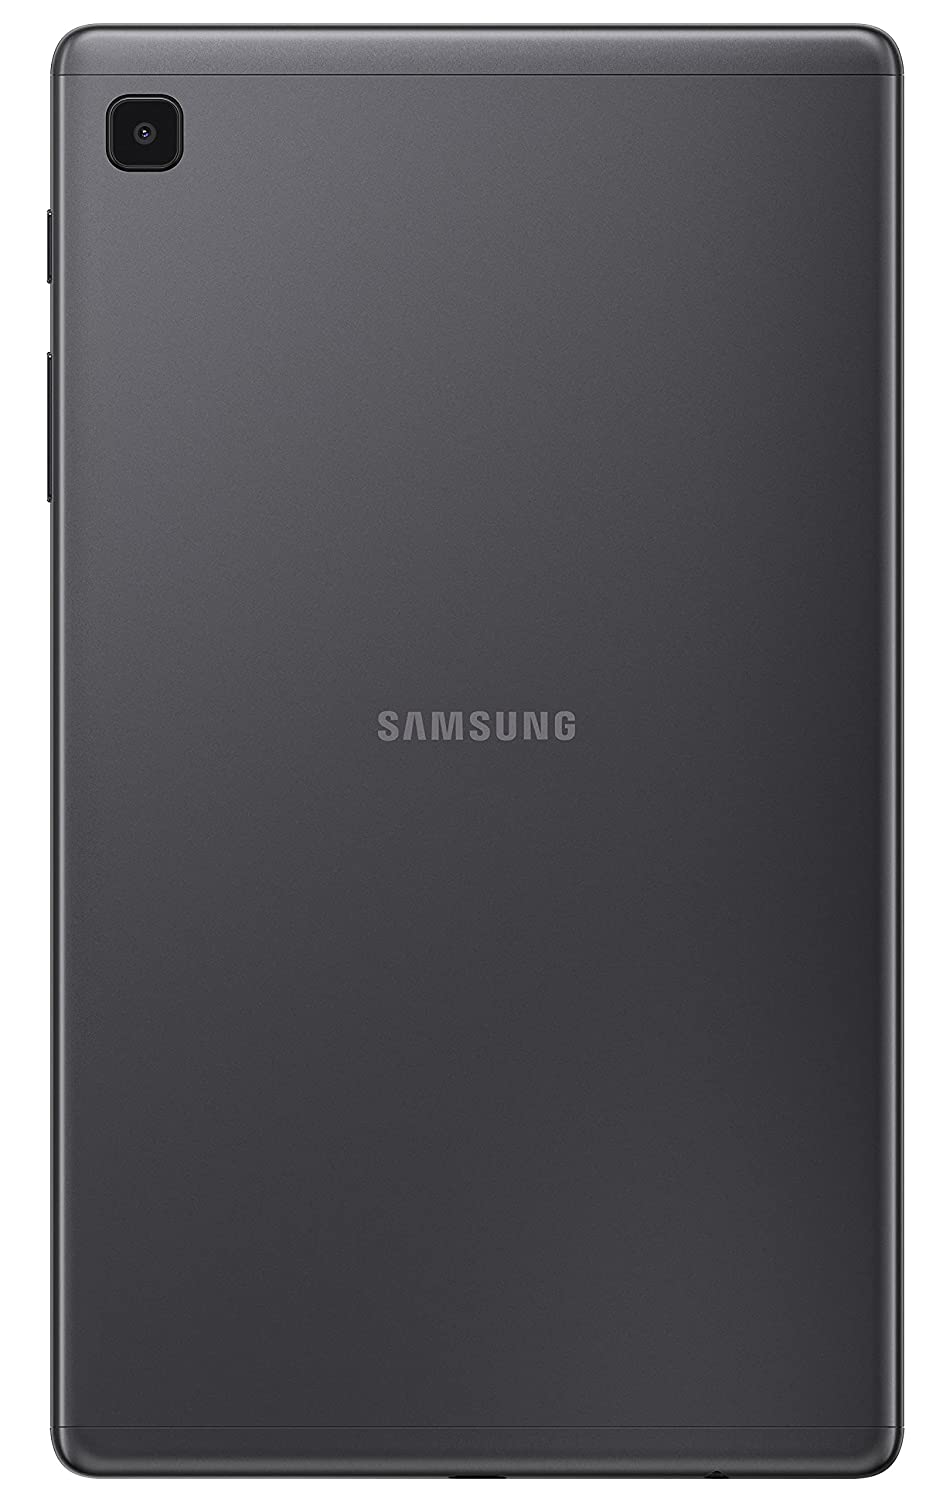 Samsung Galaxy Tab A7 Lite 8.7 inches with Calling, RAM 3 GB, ROM 32 GB Expandable, Wi-Fi+4G Tablets, Gray - Mahajan Electronics Online